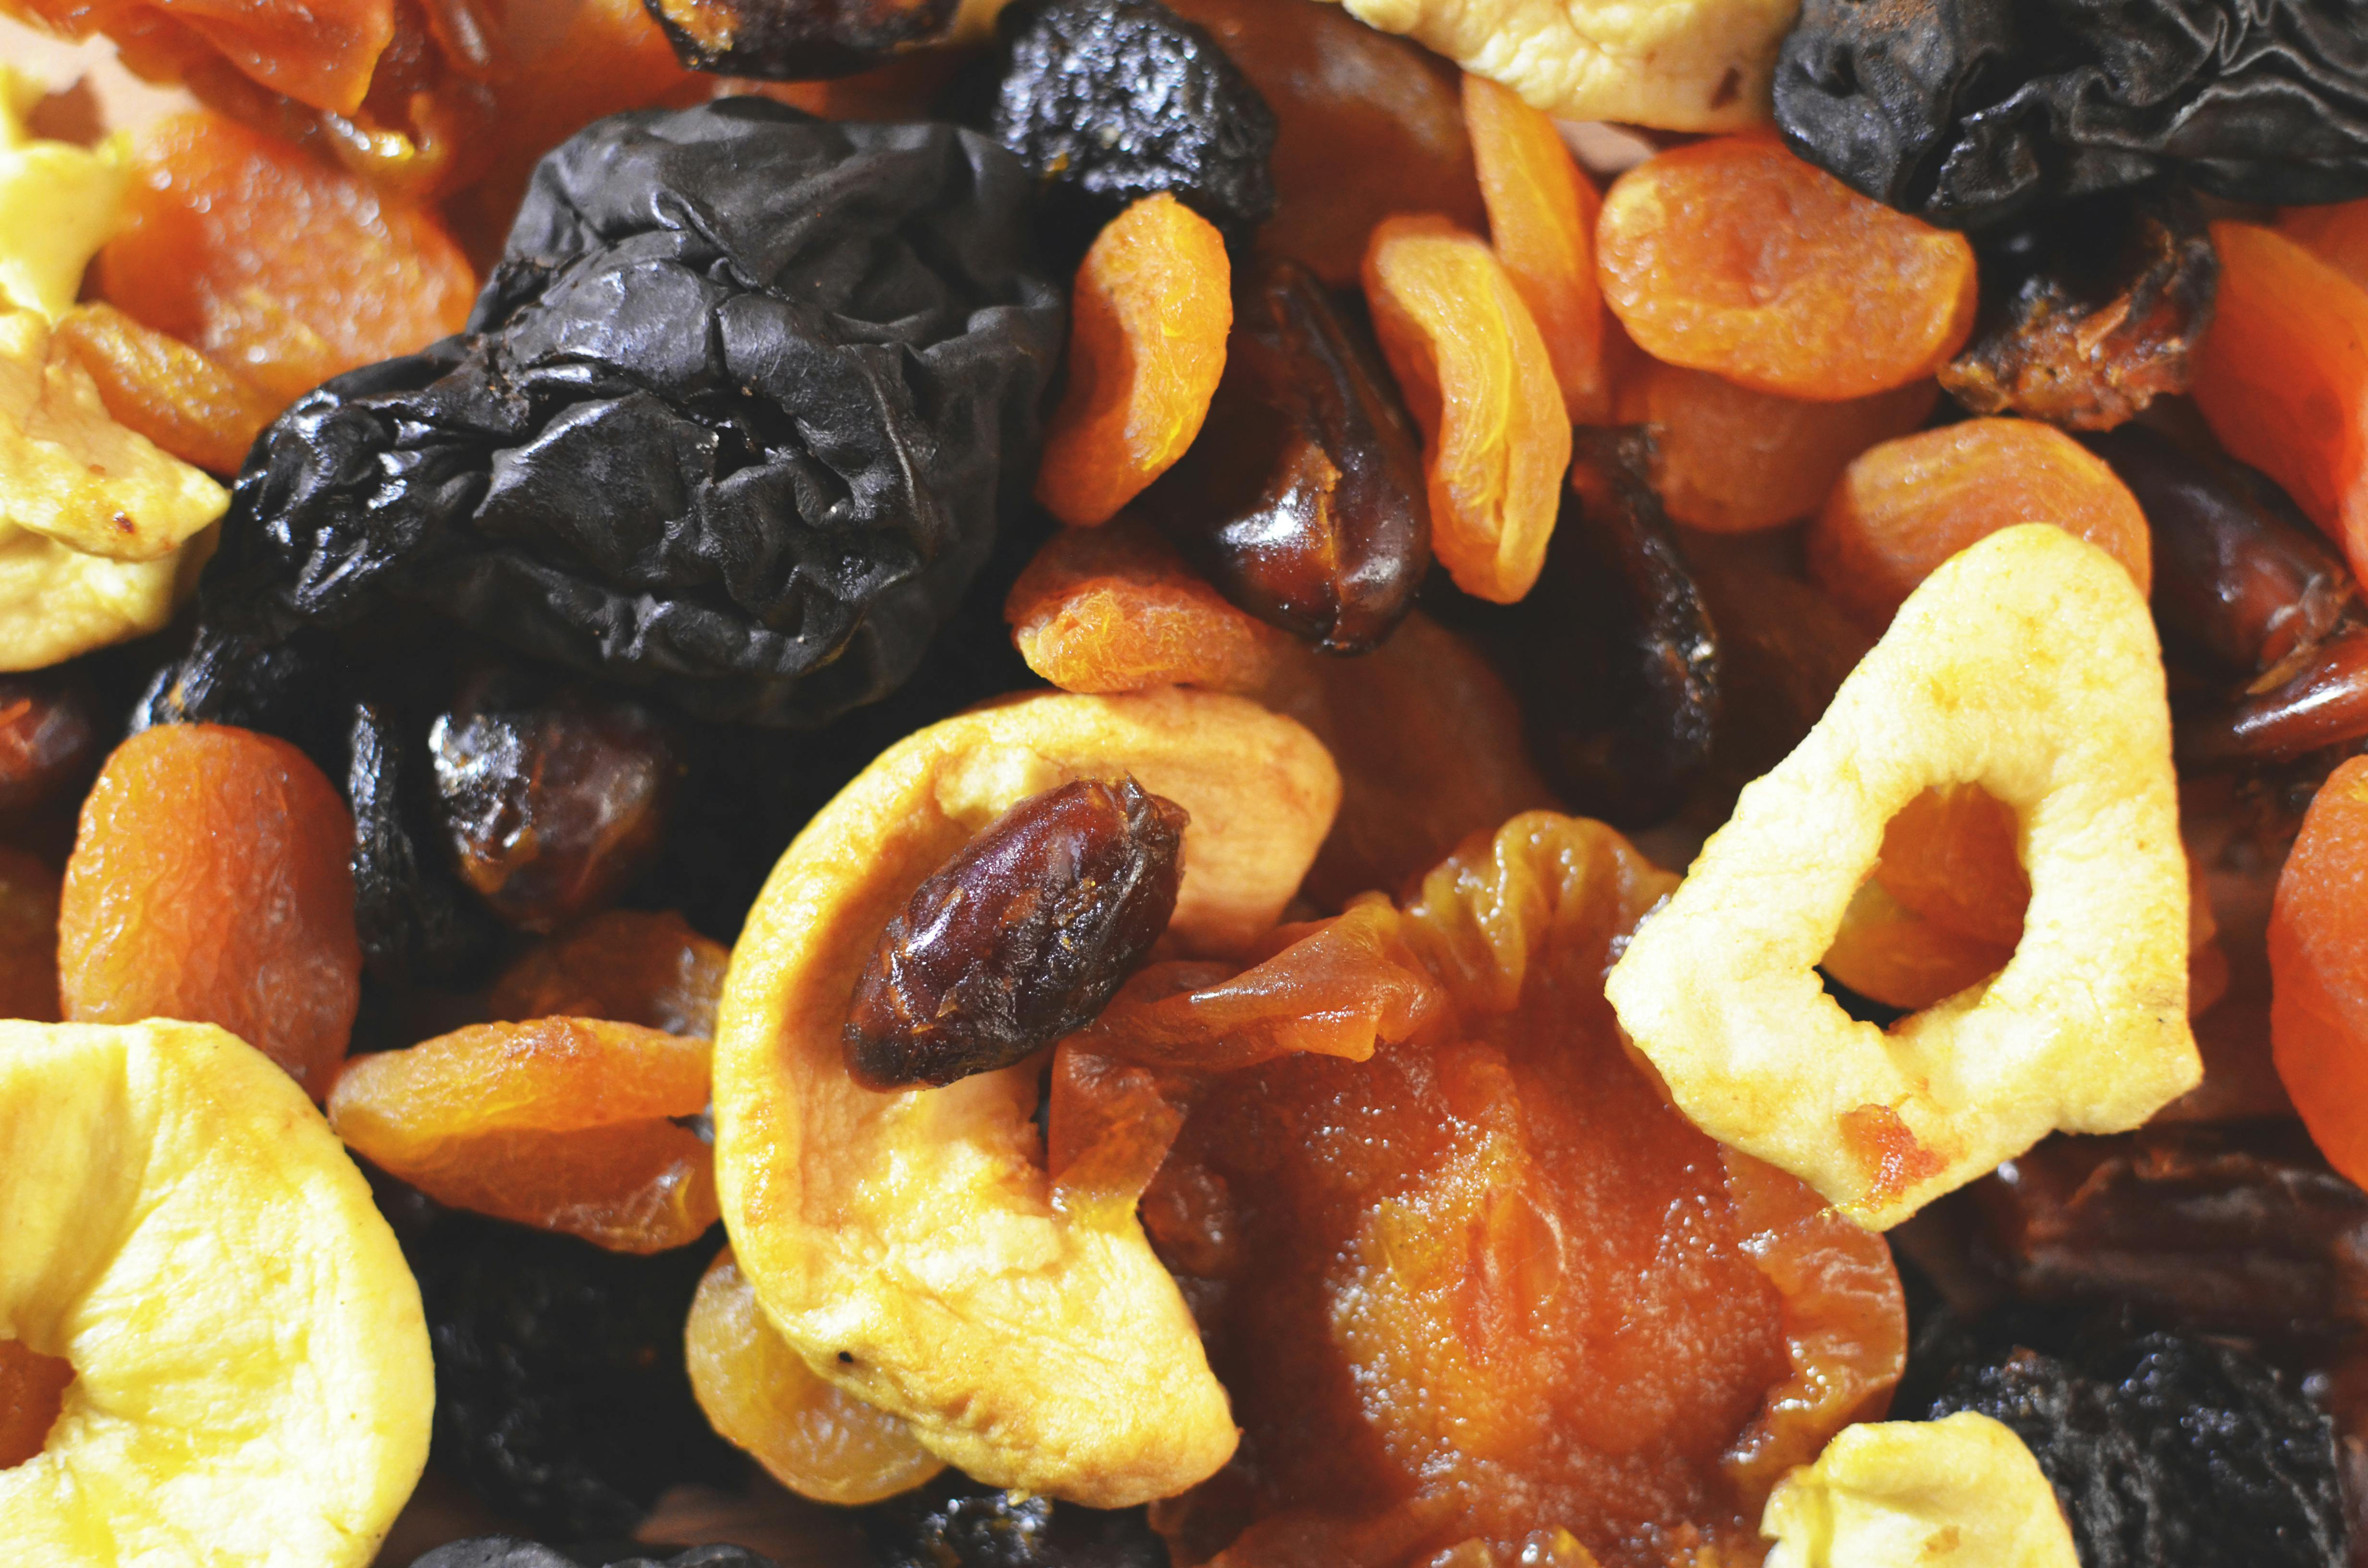 Dried fruits are easy to eat and very healthy.